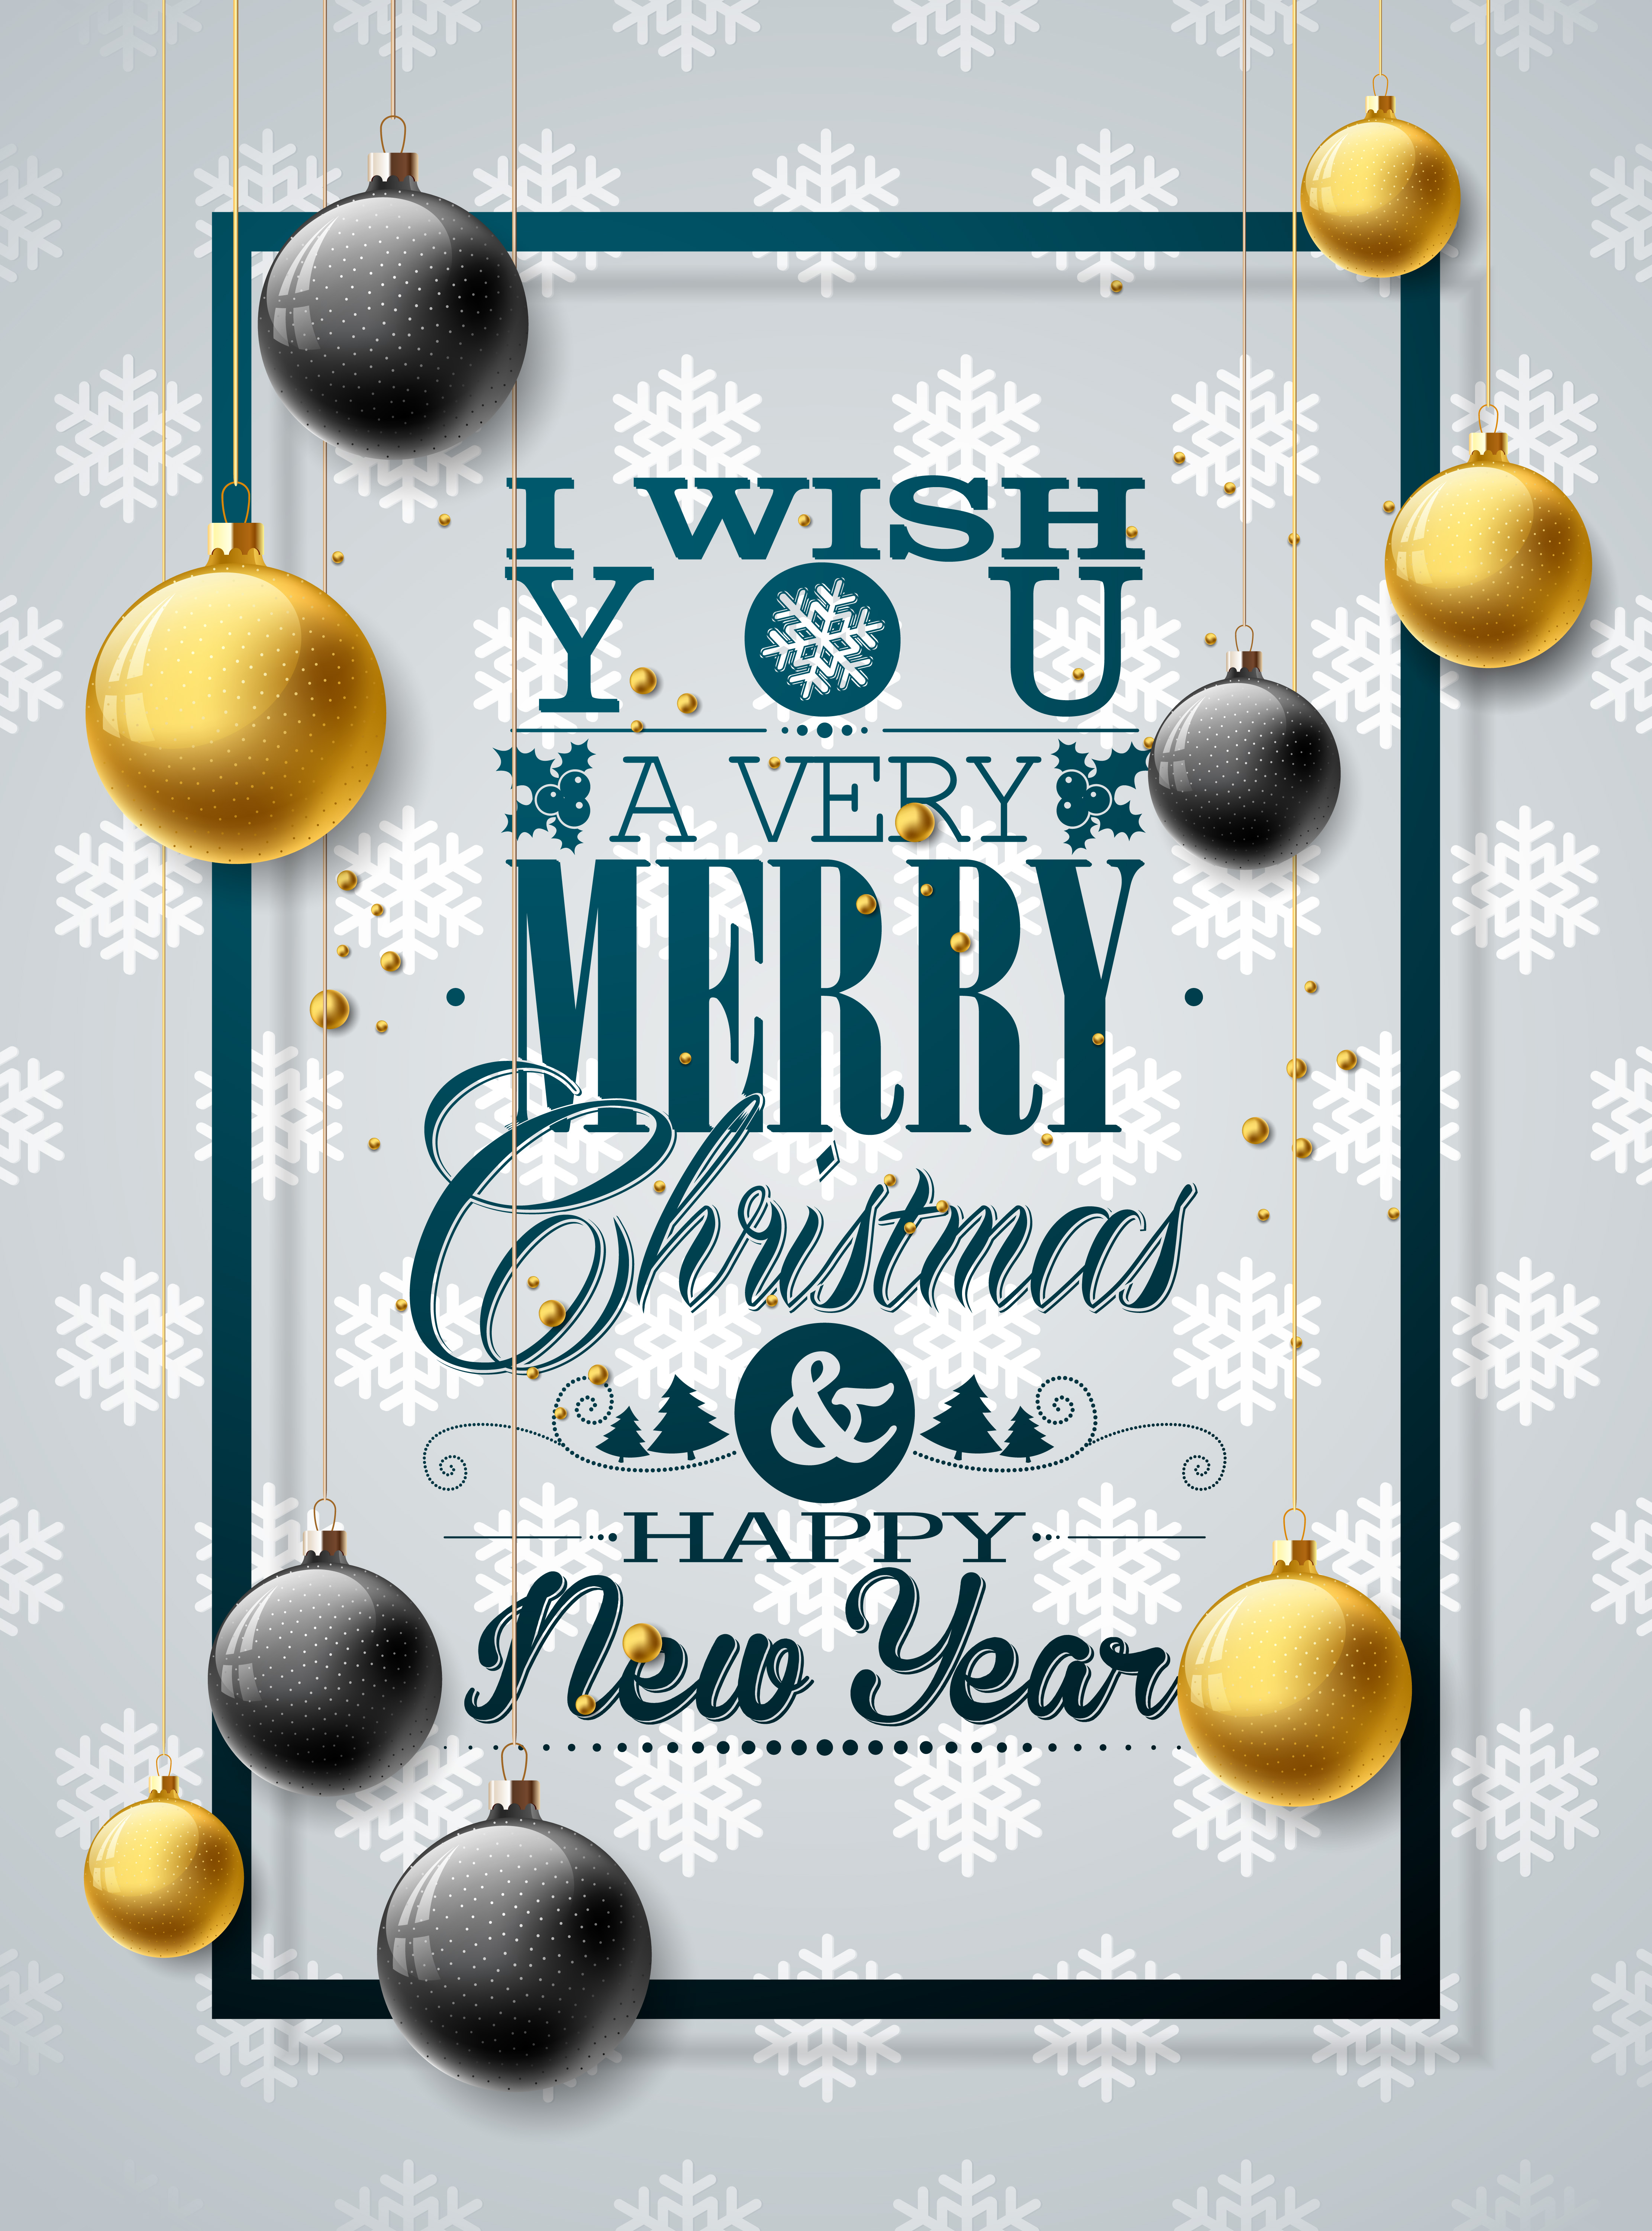 Download Christmas illustration with typography and gold ornaments ...